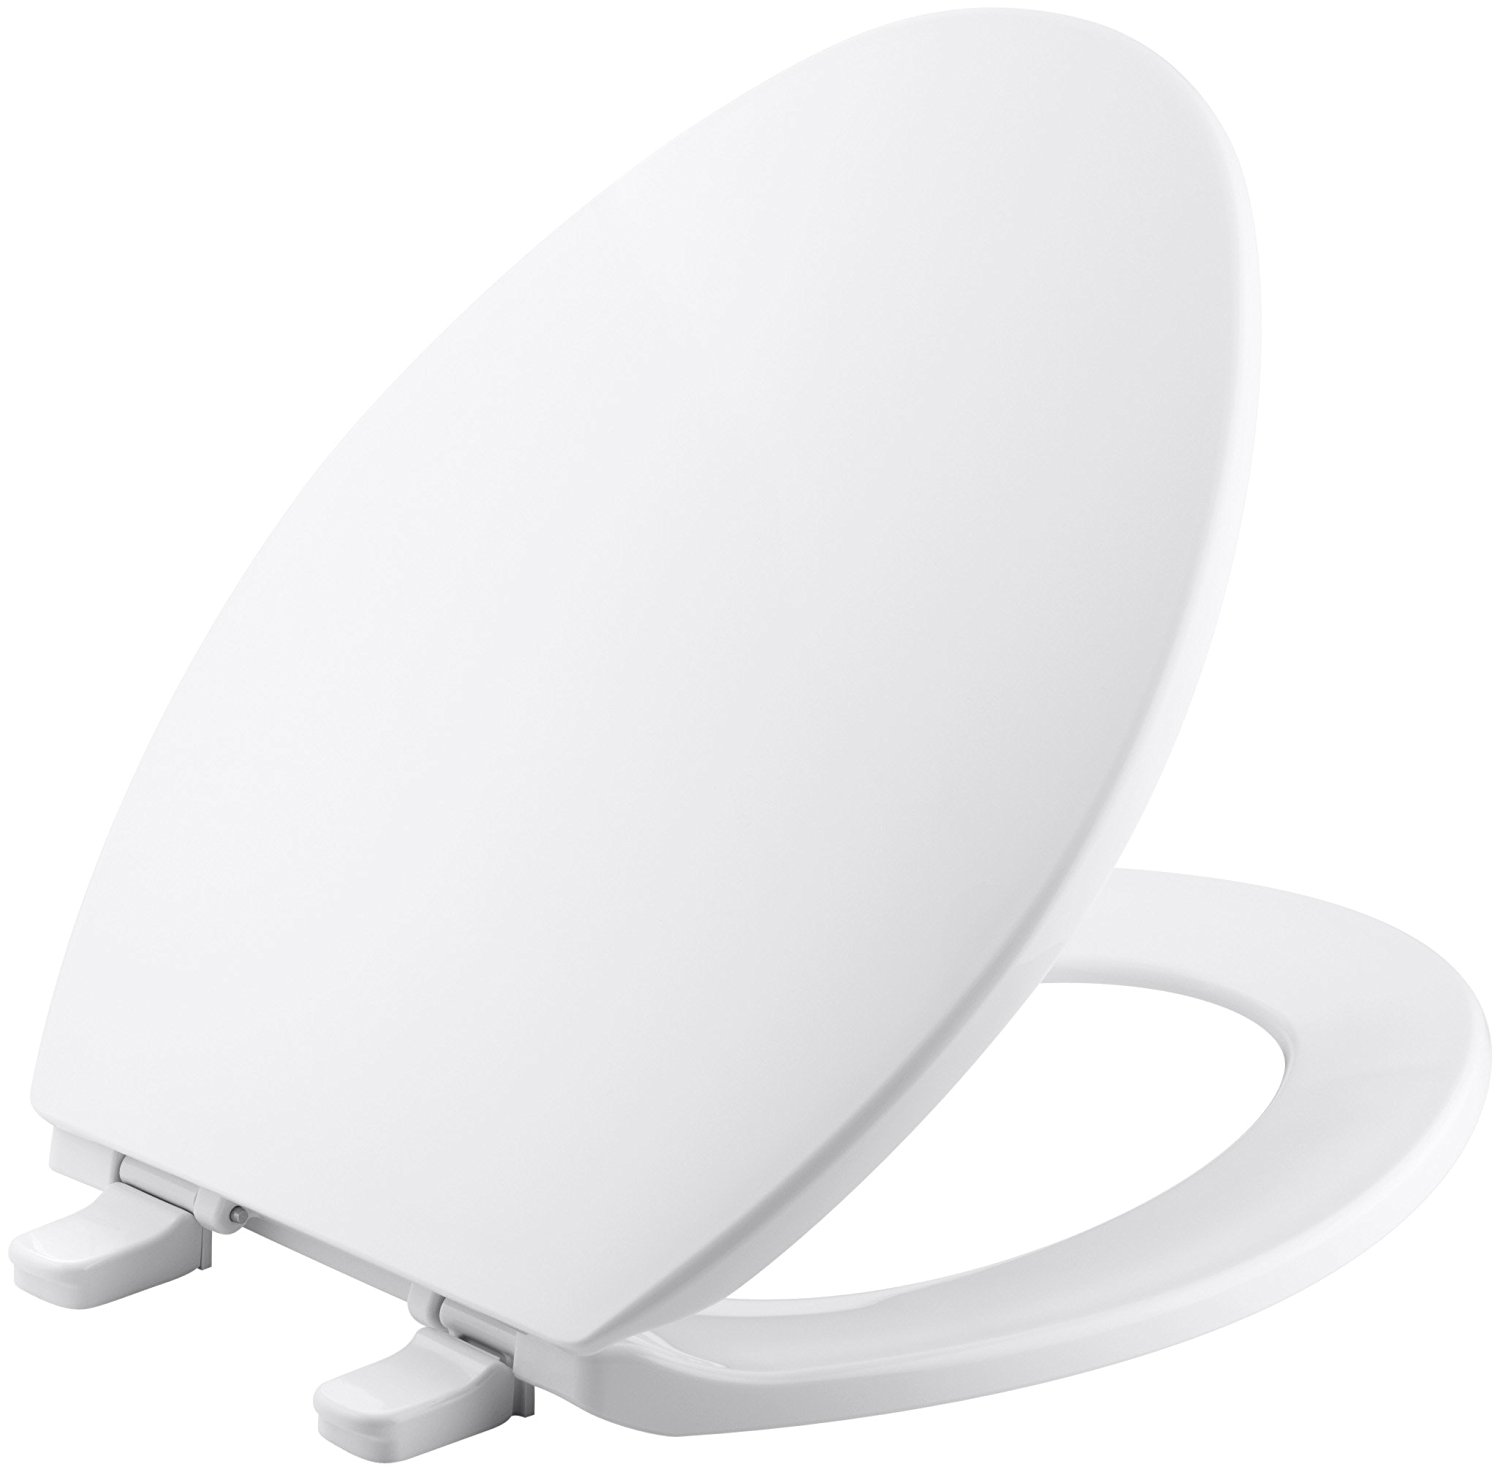 Kohler K-4774-0 Brevia with Quick-Release Hinges Elongated Toilet Seat, White